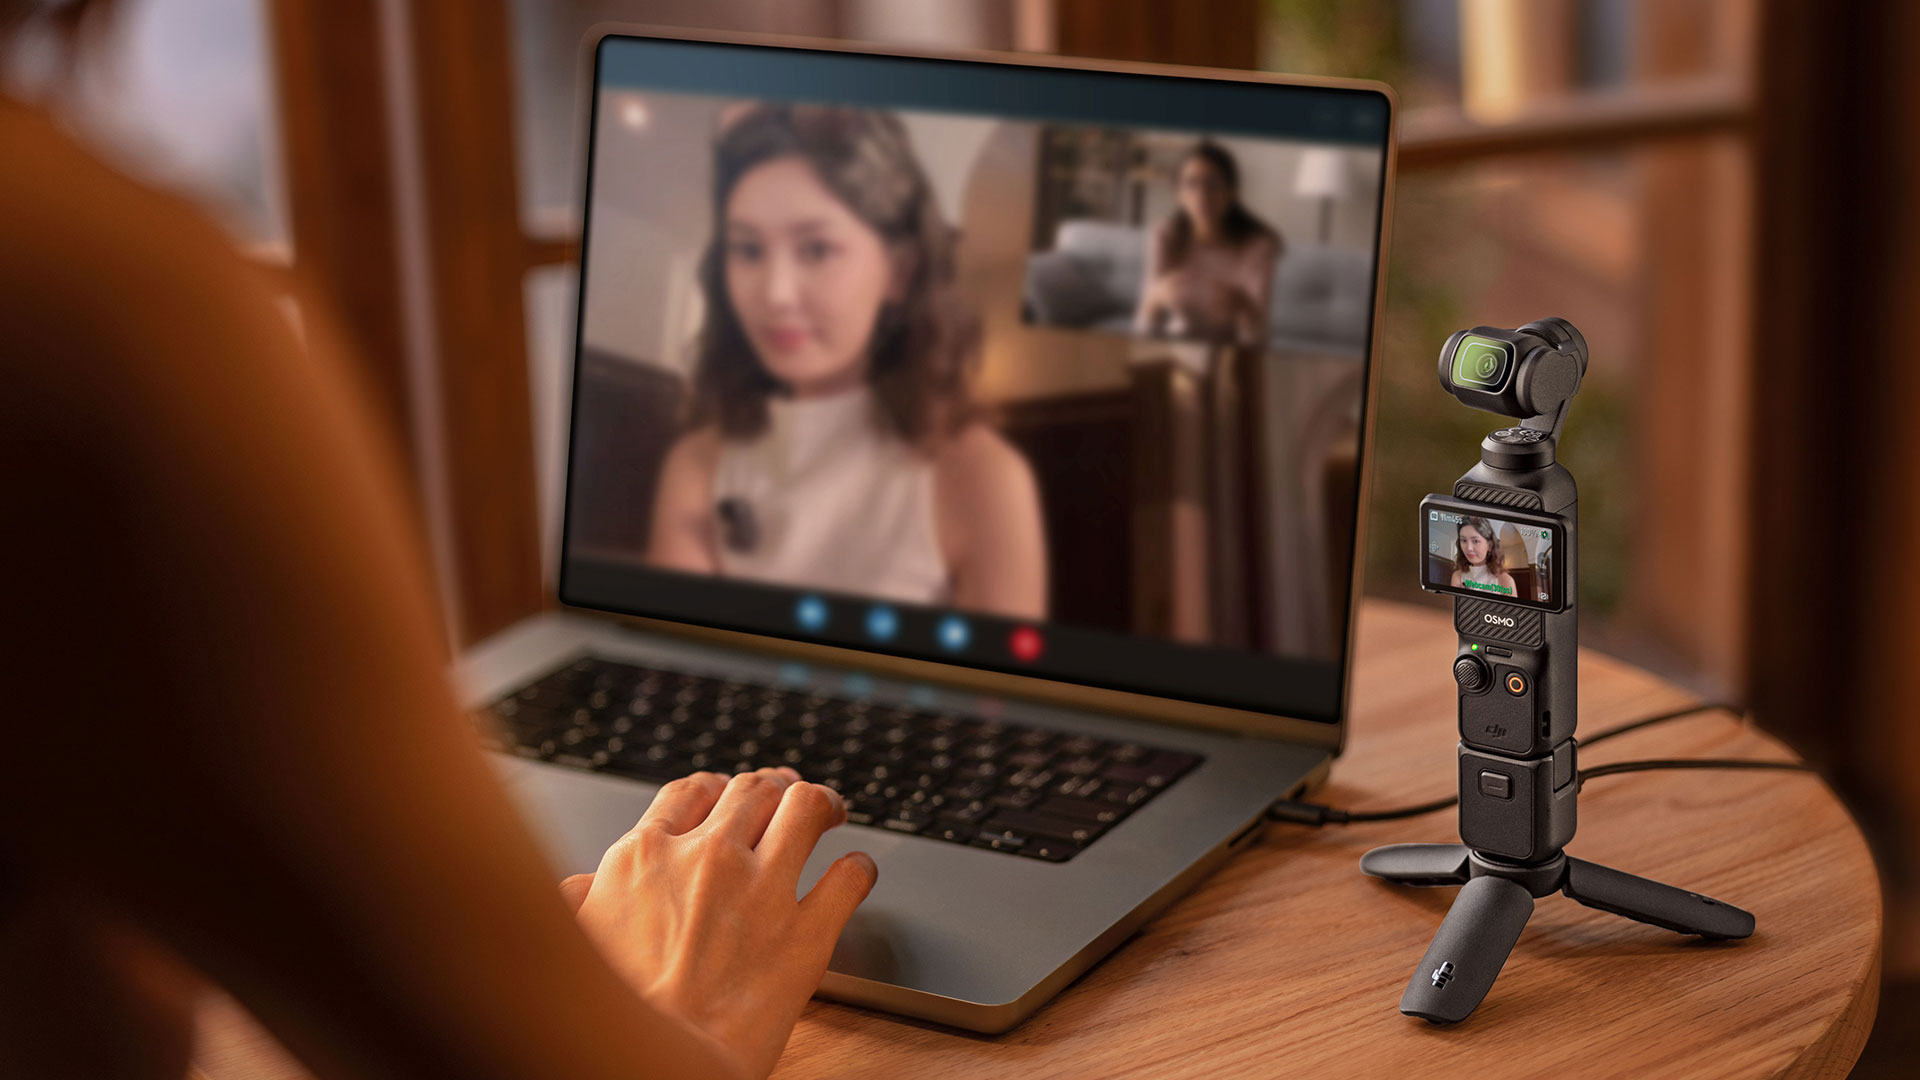 DJI has introduced the OSMO Pocket 3 camera with a 1 CMOS sensor,  4K@120fps support and a 2 display, priced from $519